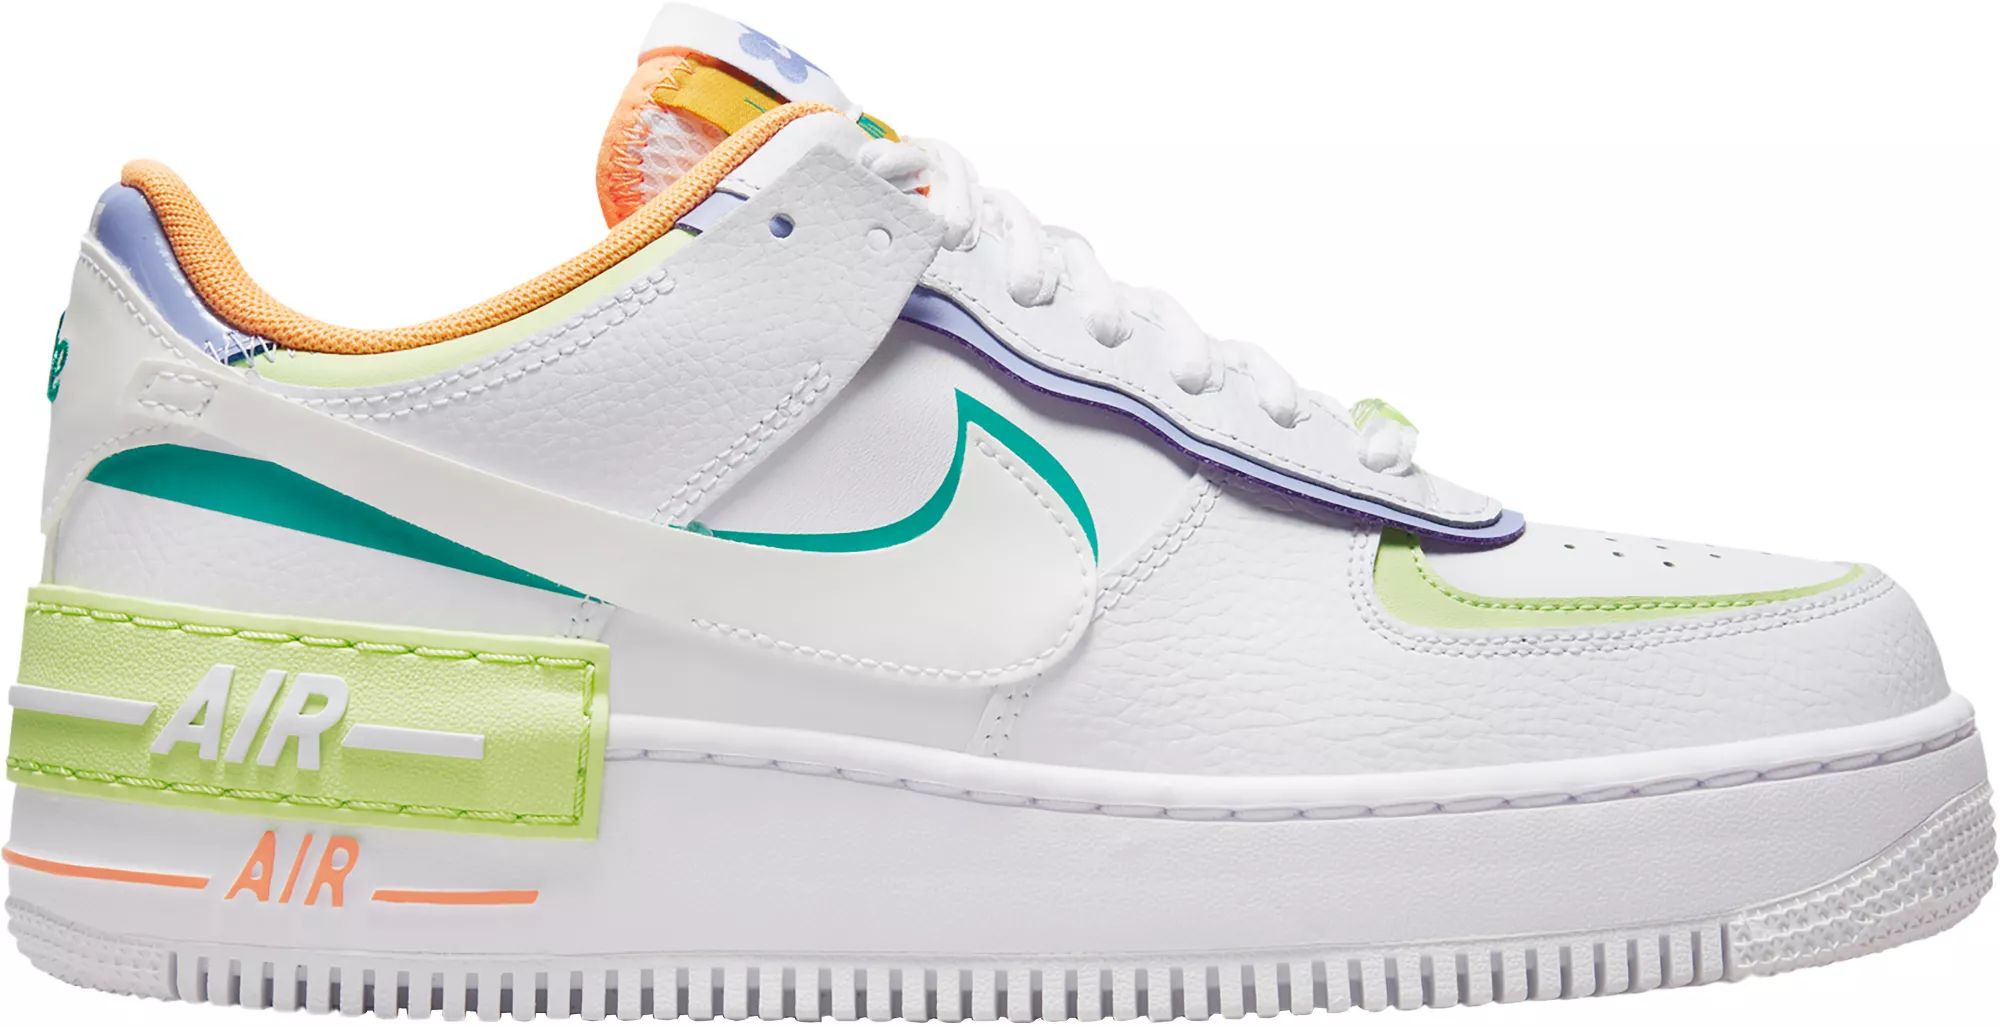 Nike Women's Air Force 1 Shadow Shoes, Size 7.5, White/Peach Cream | Dick's Sporting Goods